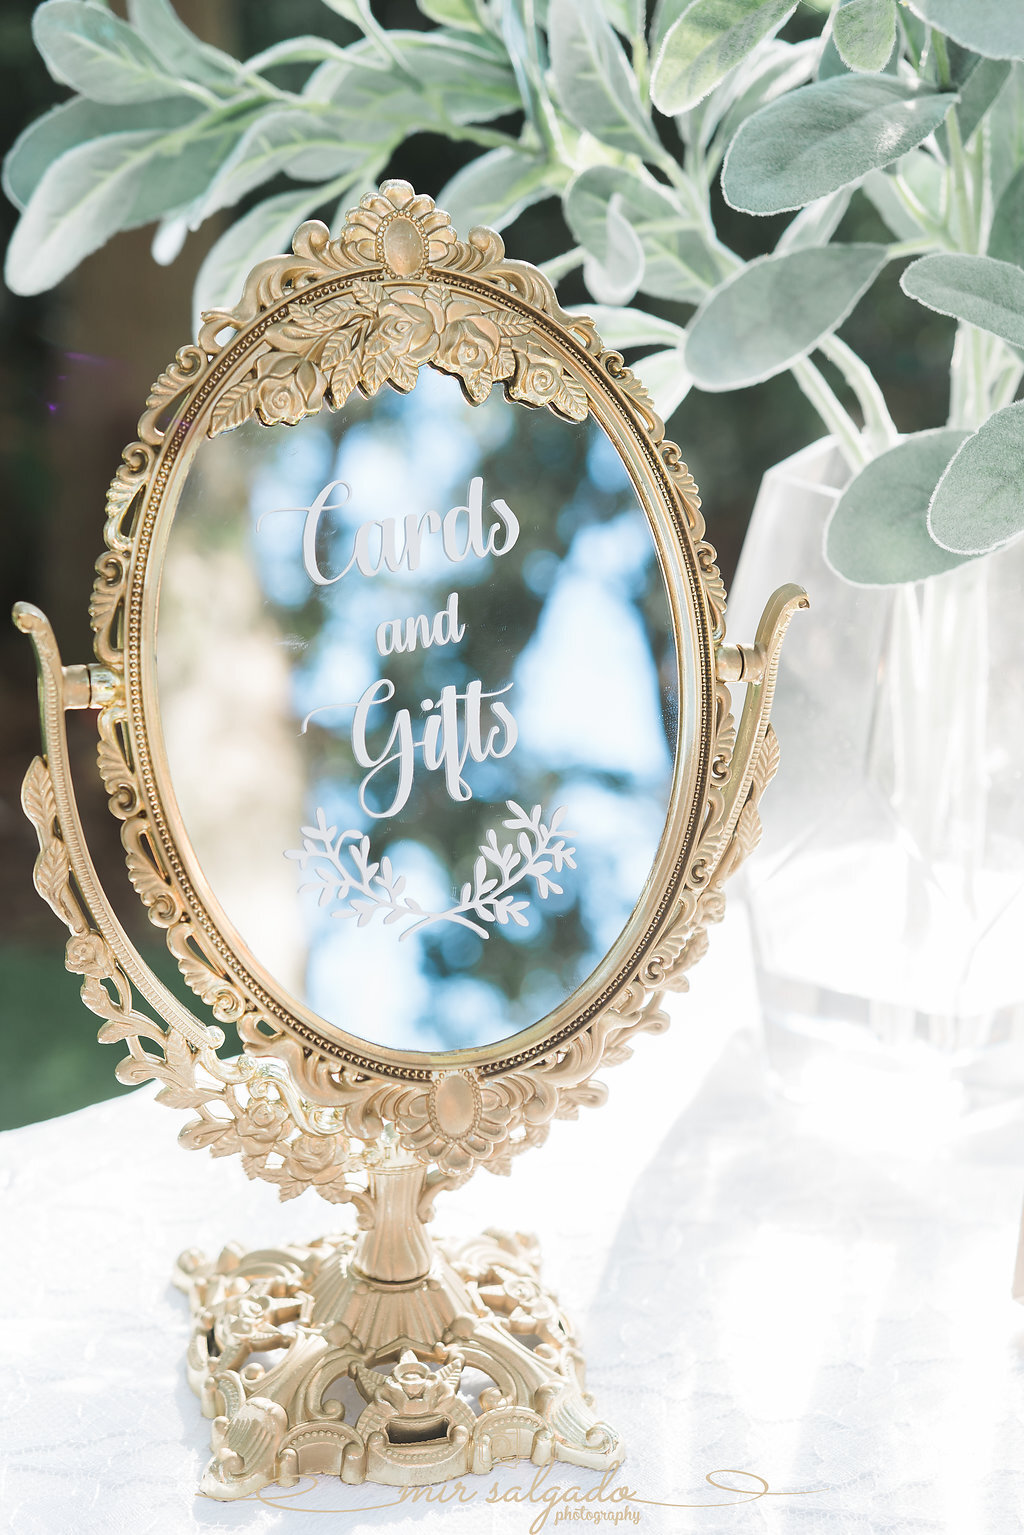 gold-calligraphy-mirror, wedding-calligraphy, notes-and-gifts-table